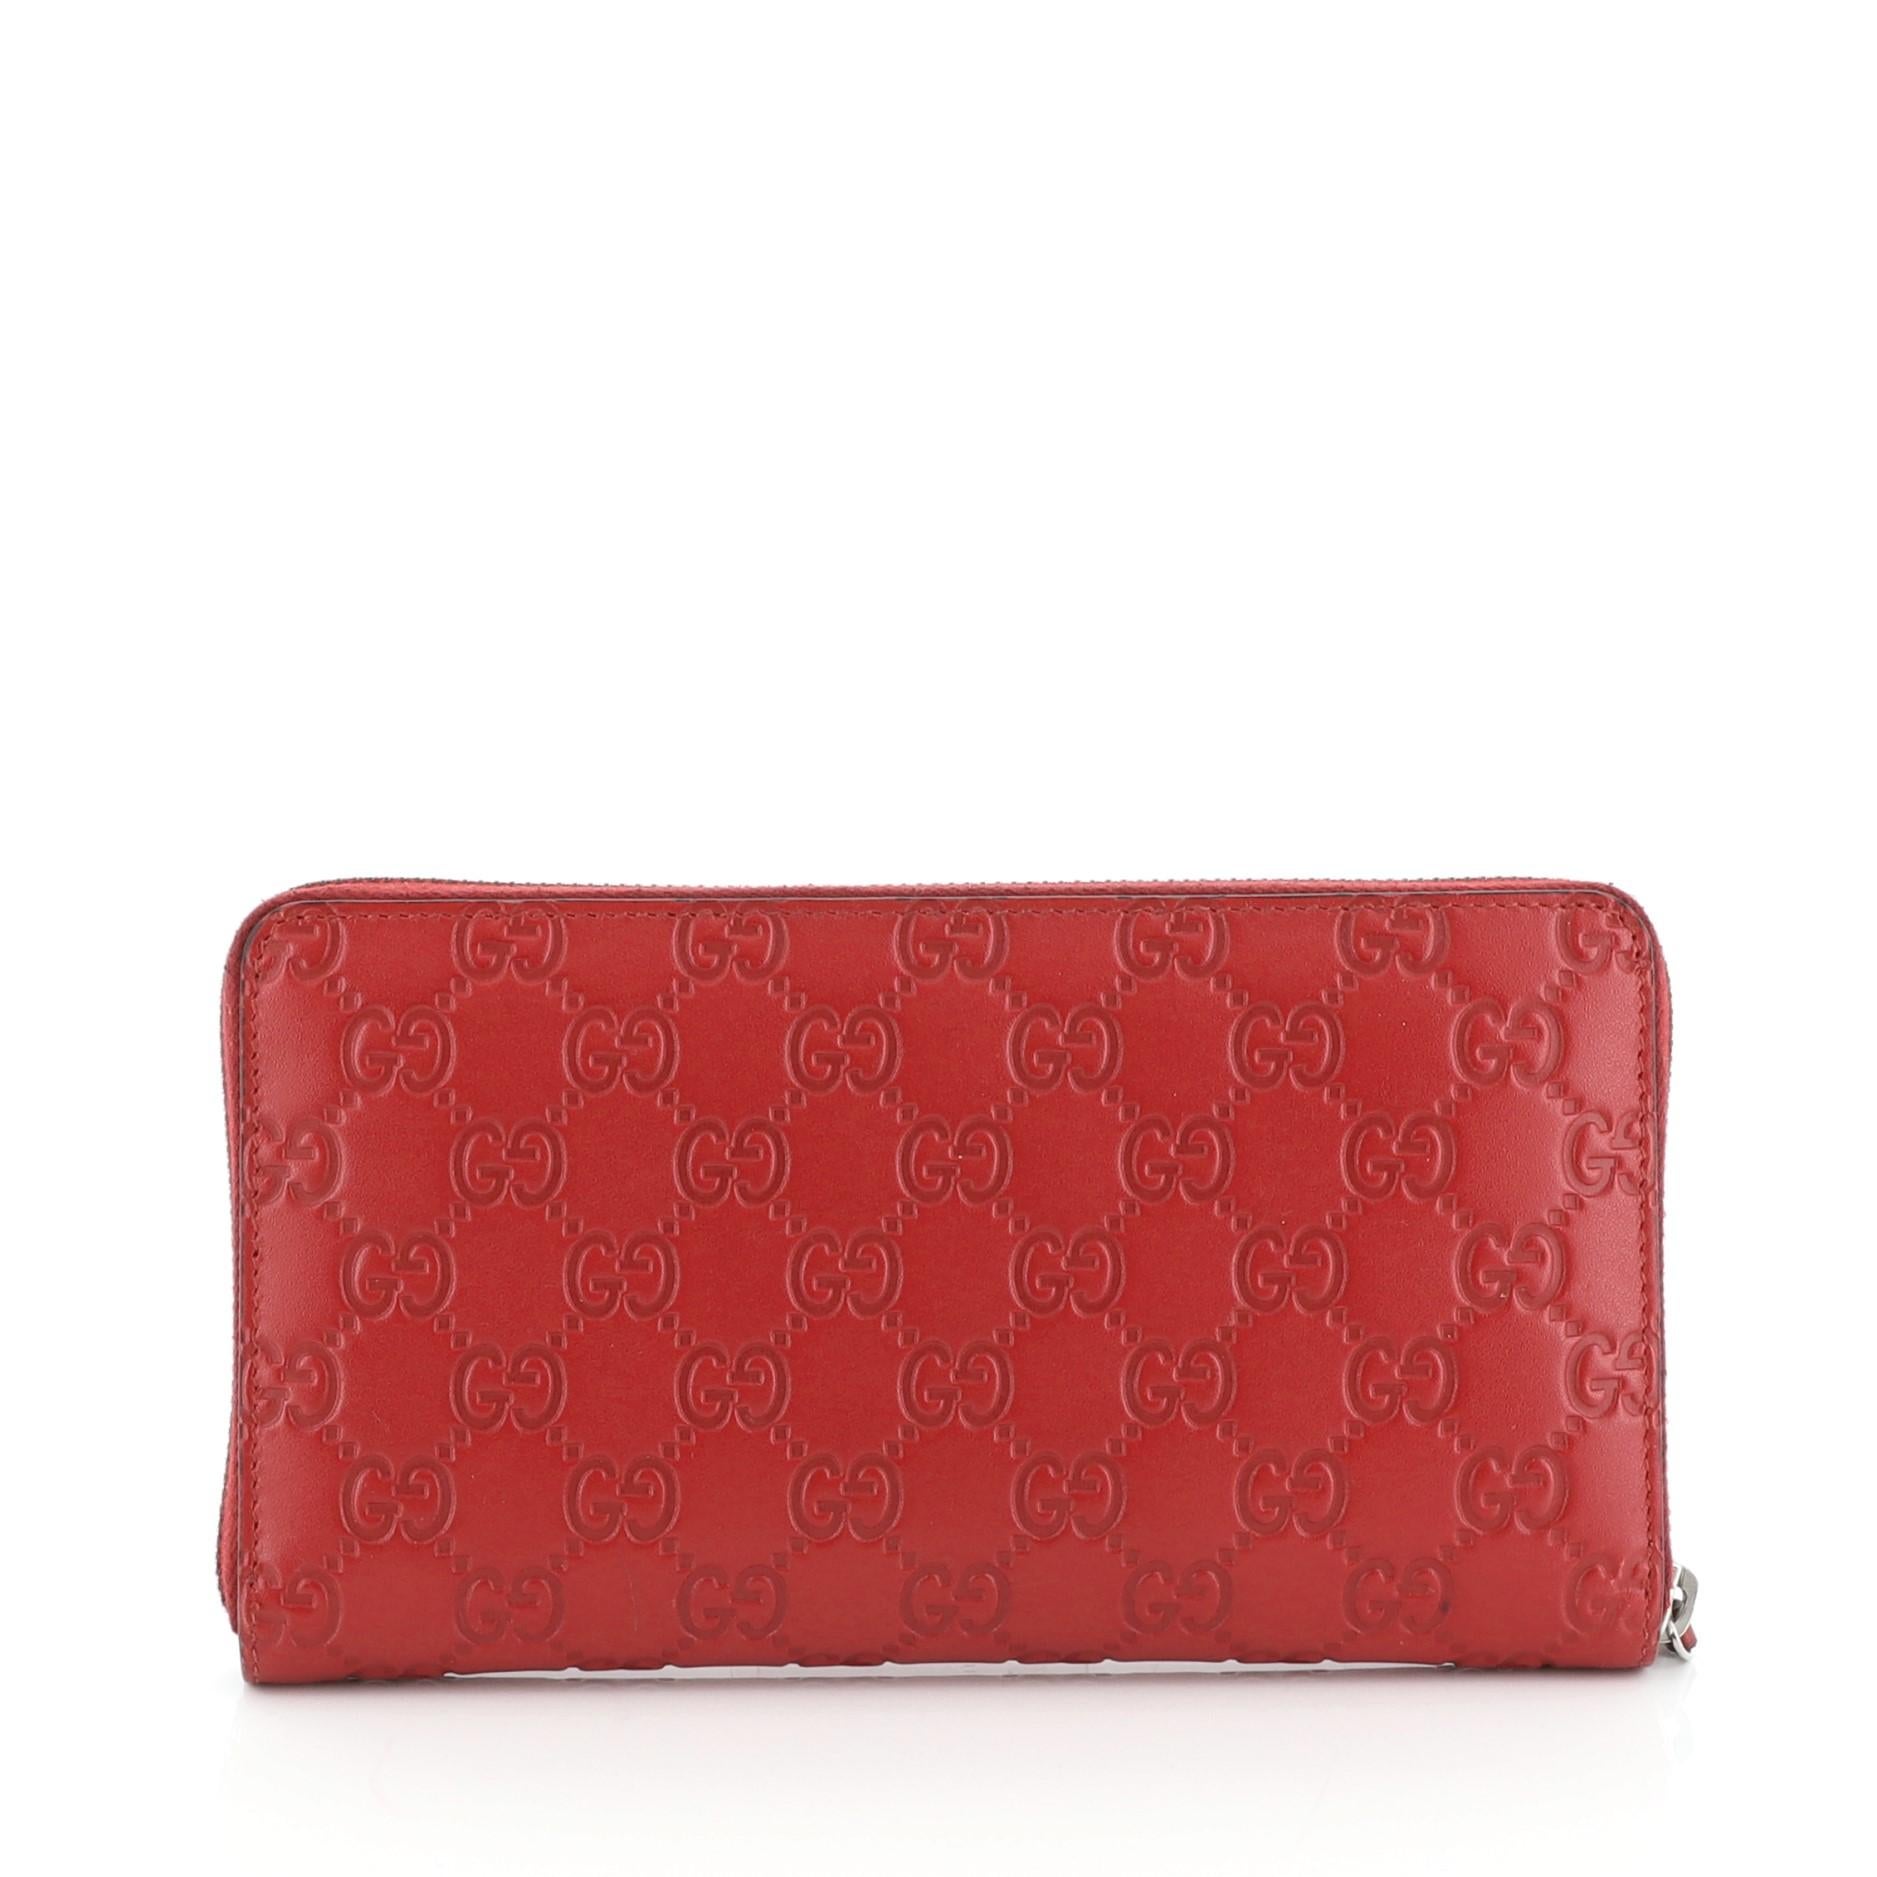 Red Gucci Signature Zip Around Wallet Guccissima Leather